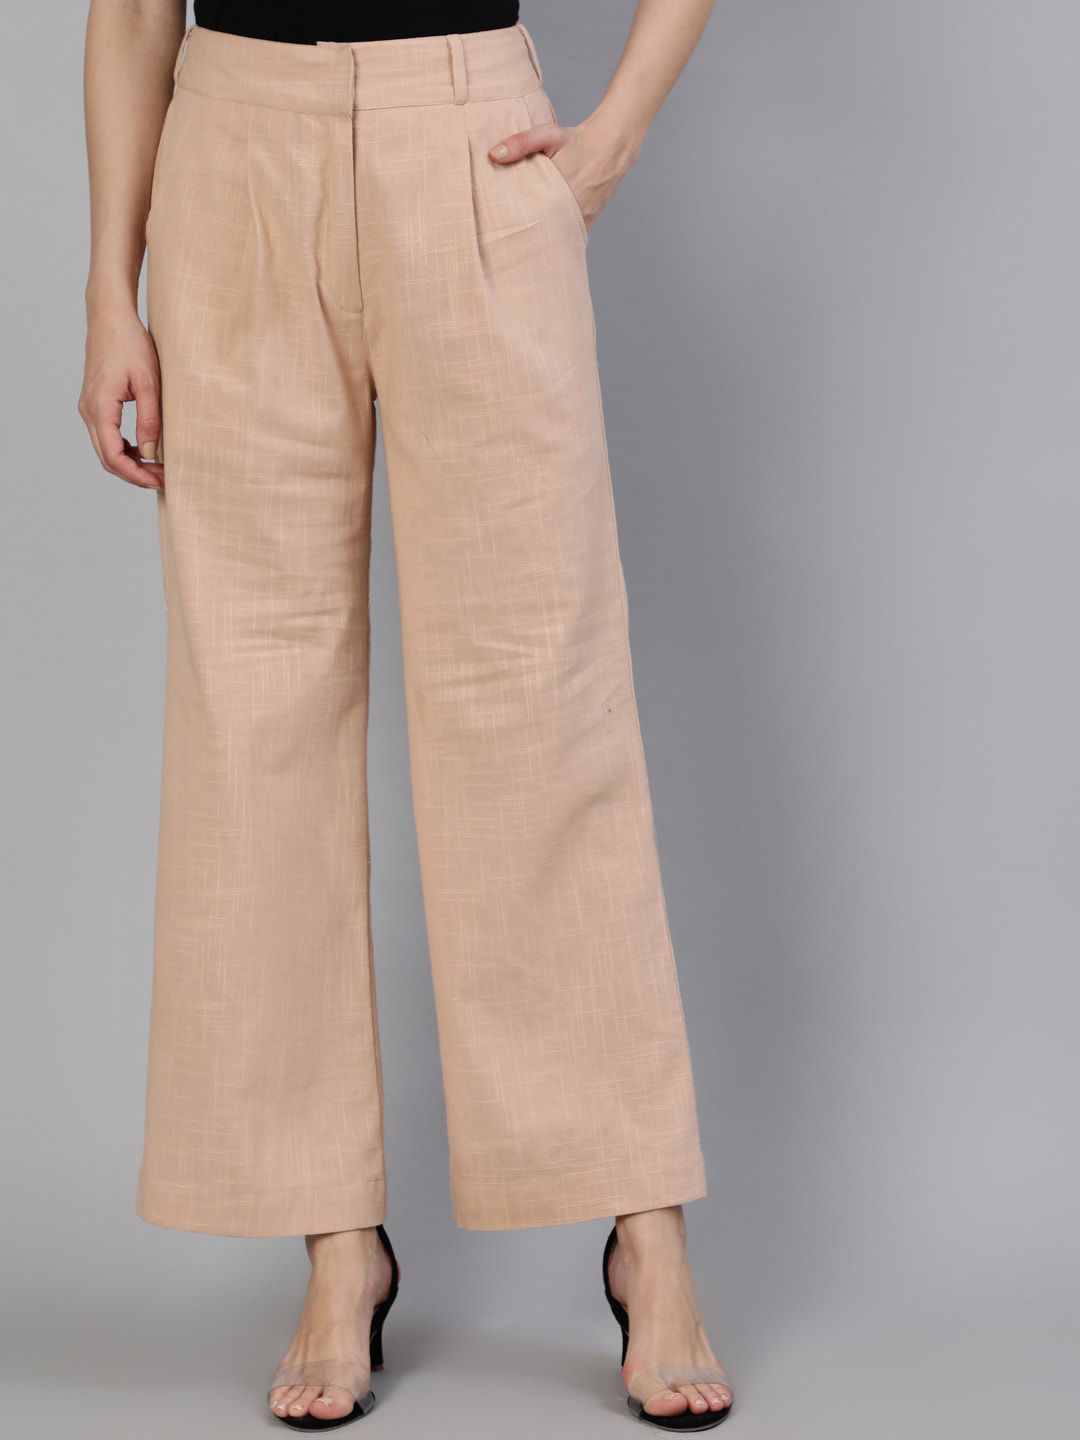 Jaipur Kurti Women Peach-Coloured Flared High-Rise Pleated Cotton Parallel Trousers Price in India